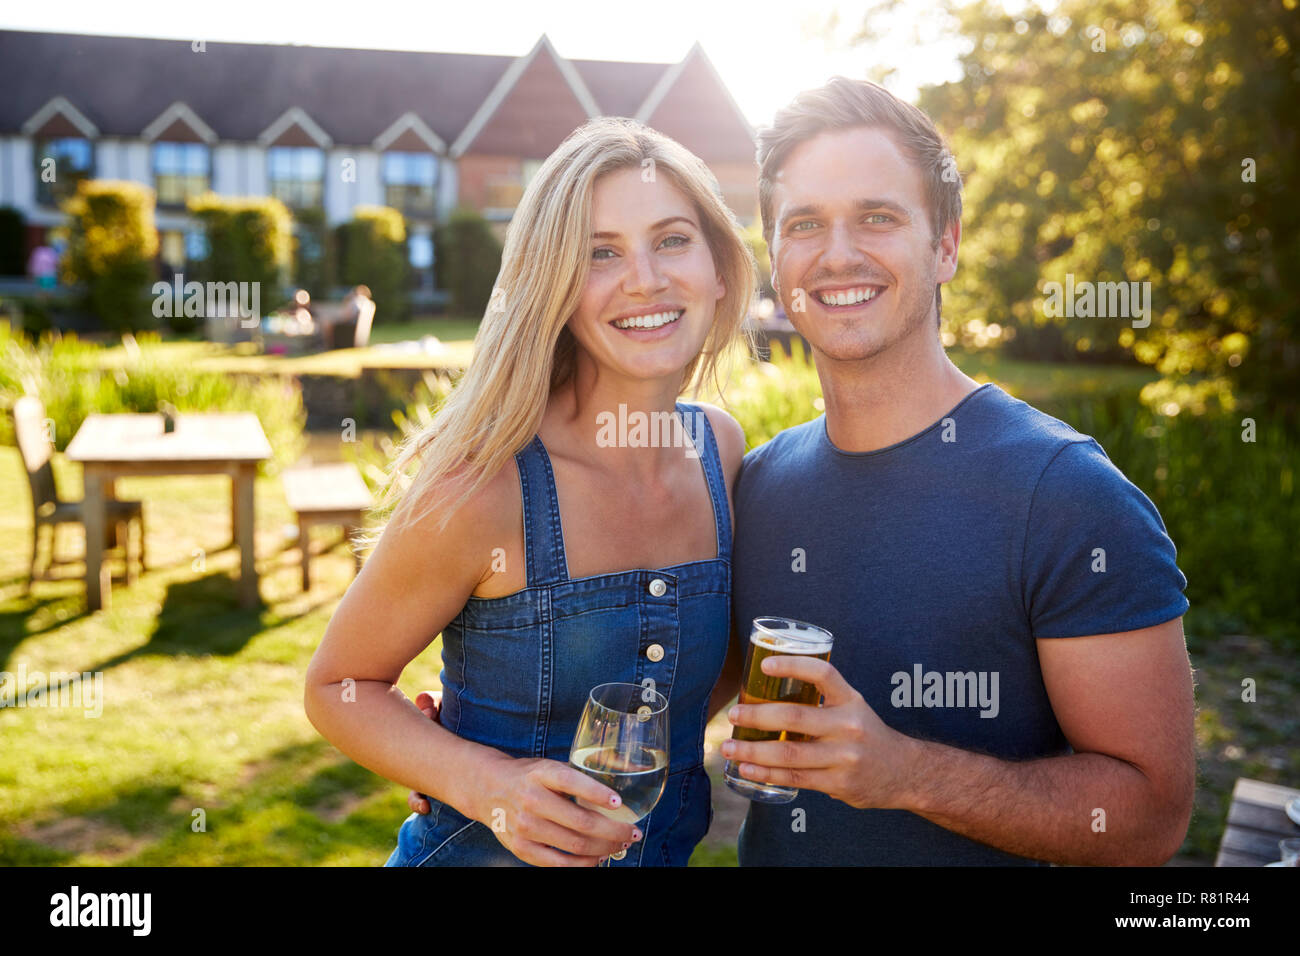 Portrait Of Couple Enjoying Outdoor Summer Drink At Pub Stock Photo